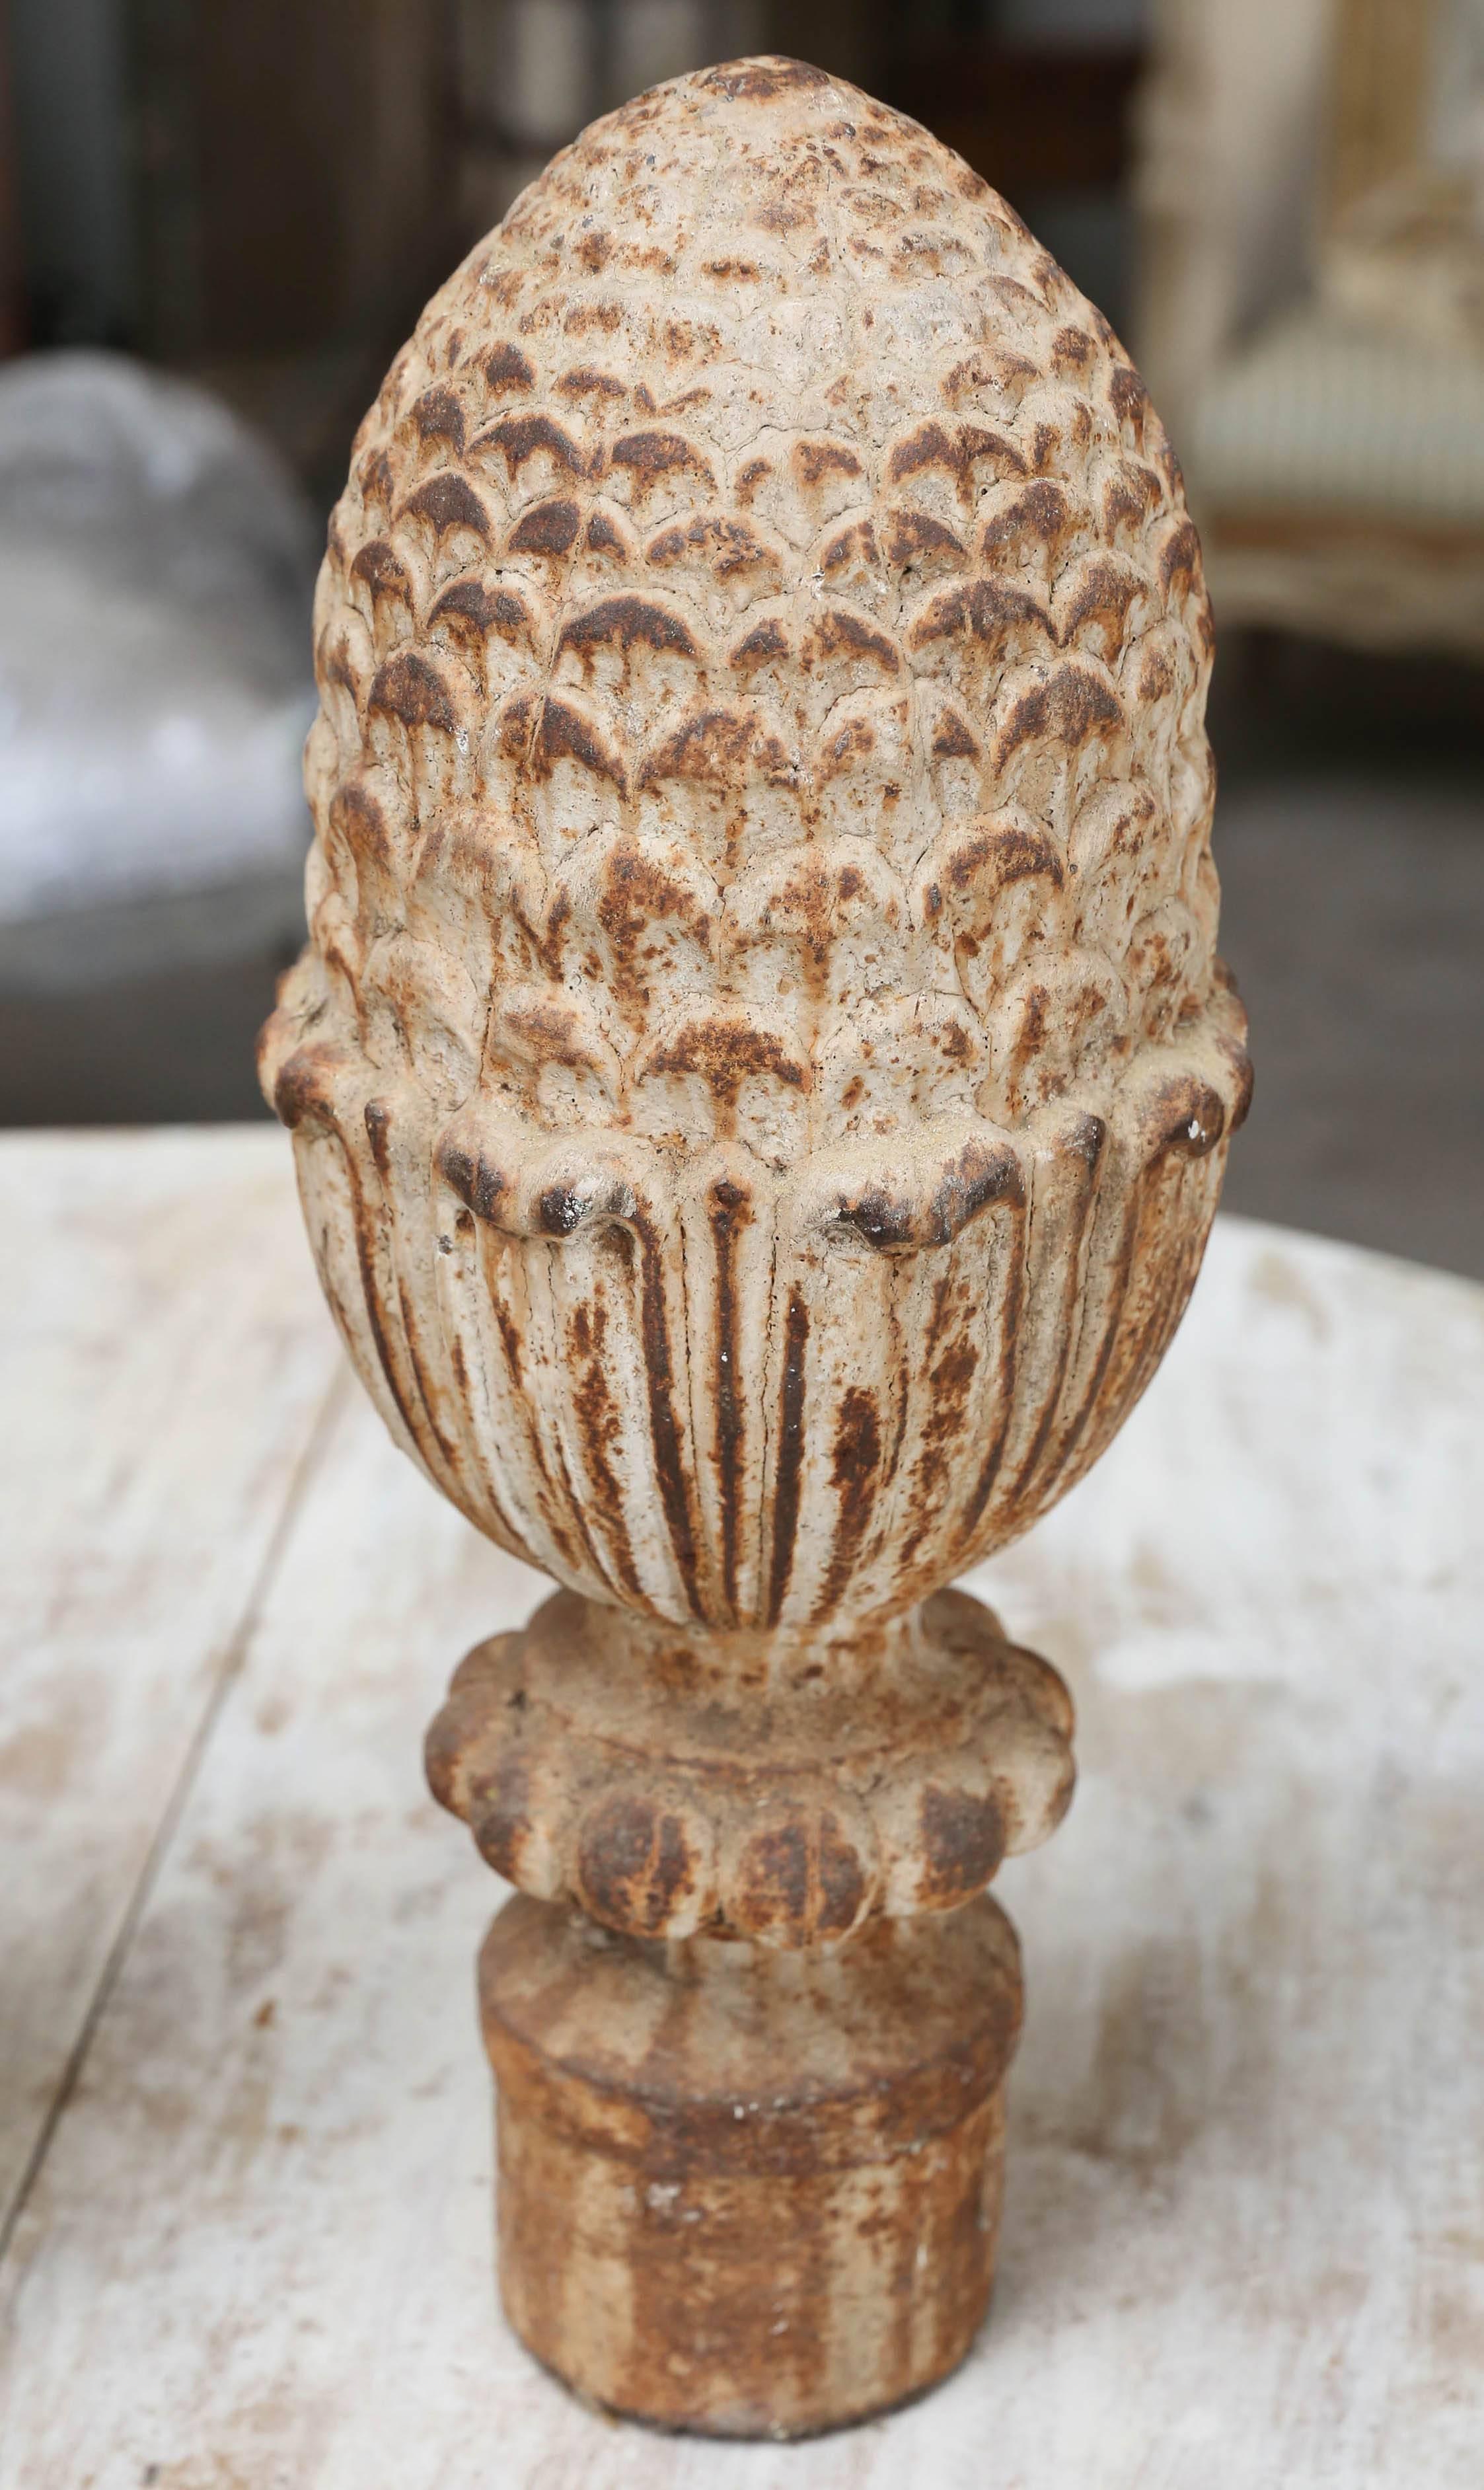 Great French pineapple finials in iron from the 19th century. Wonderful natural patina.